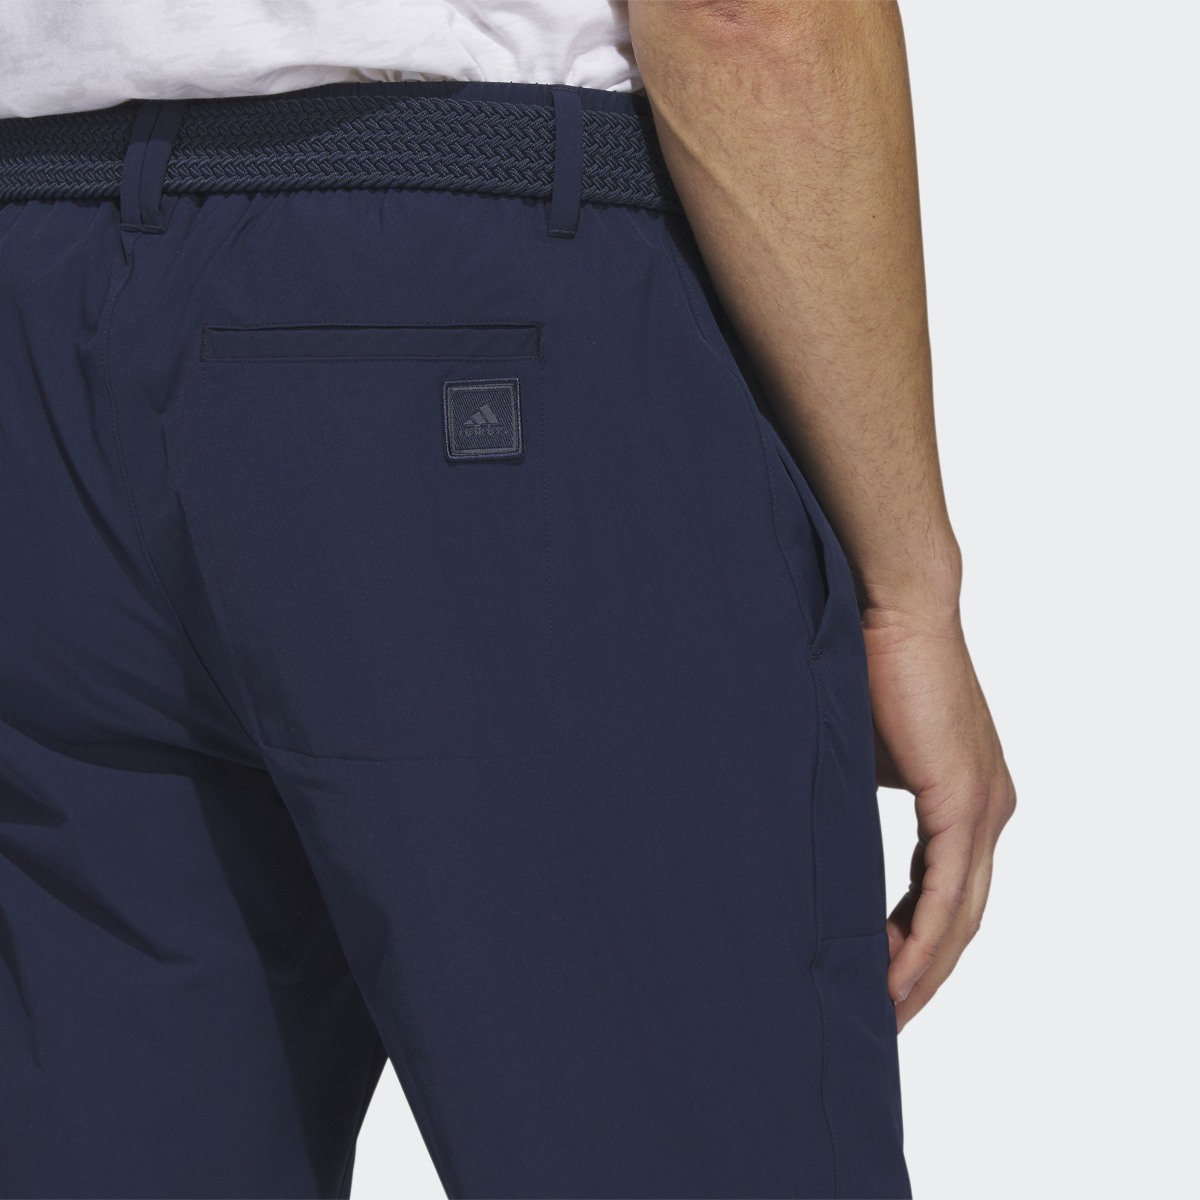 Adidas Go-To Commuter Pants. 6